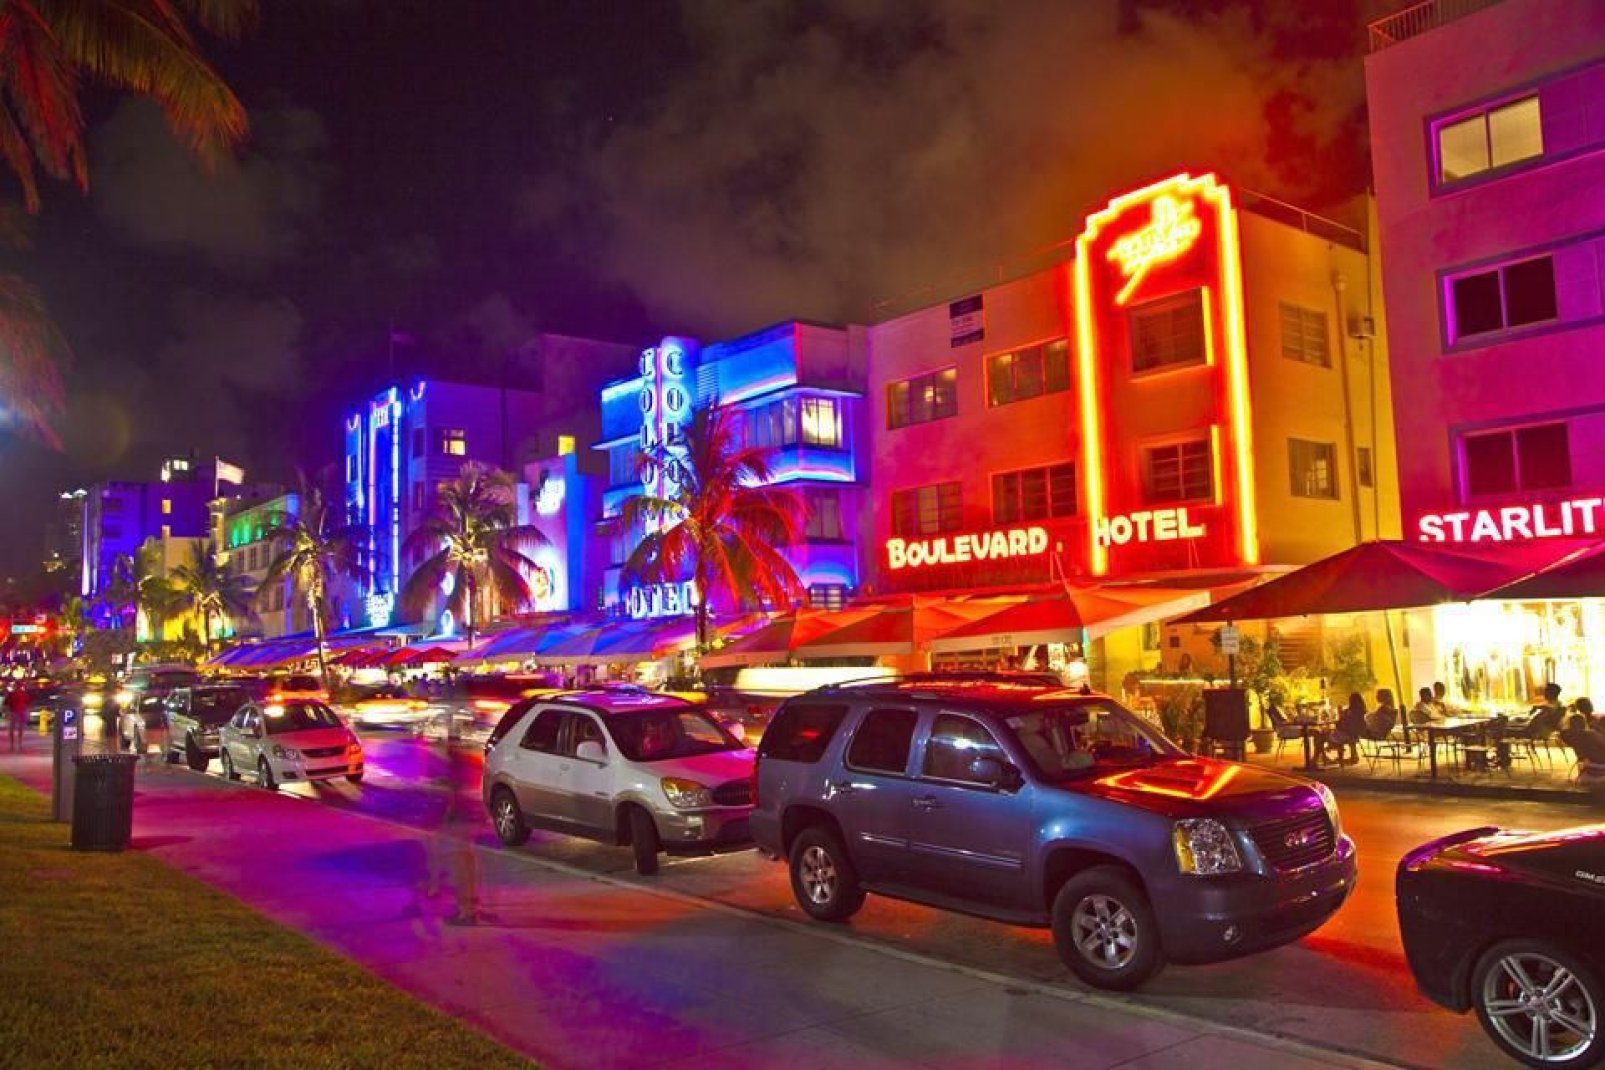 Ocean Drive is the most Art Deco street in Florida.